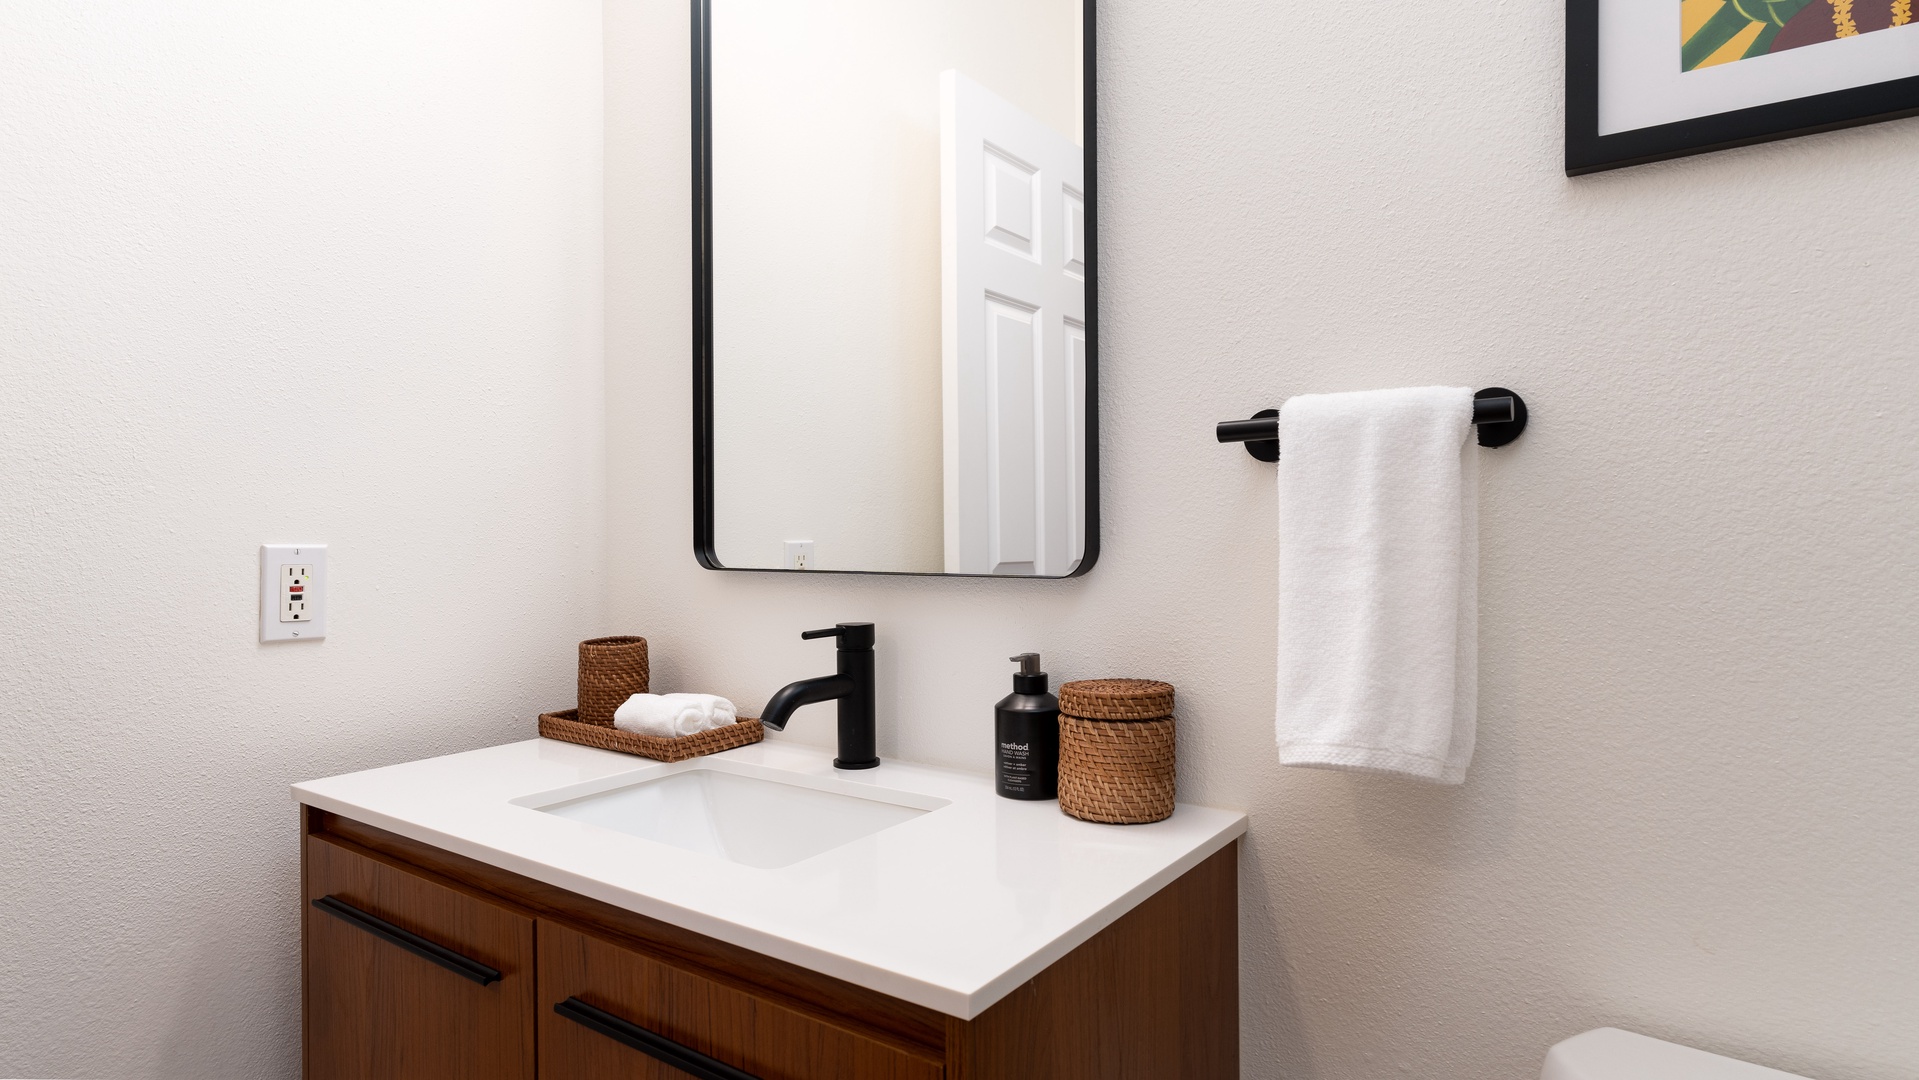 Kapolei Vacation Rentals, Coconut Plantation 1136-4 - The generously appointed guest bathroom.